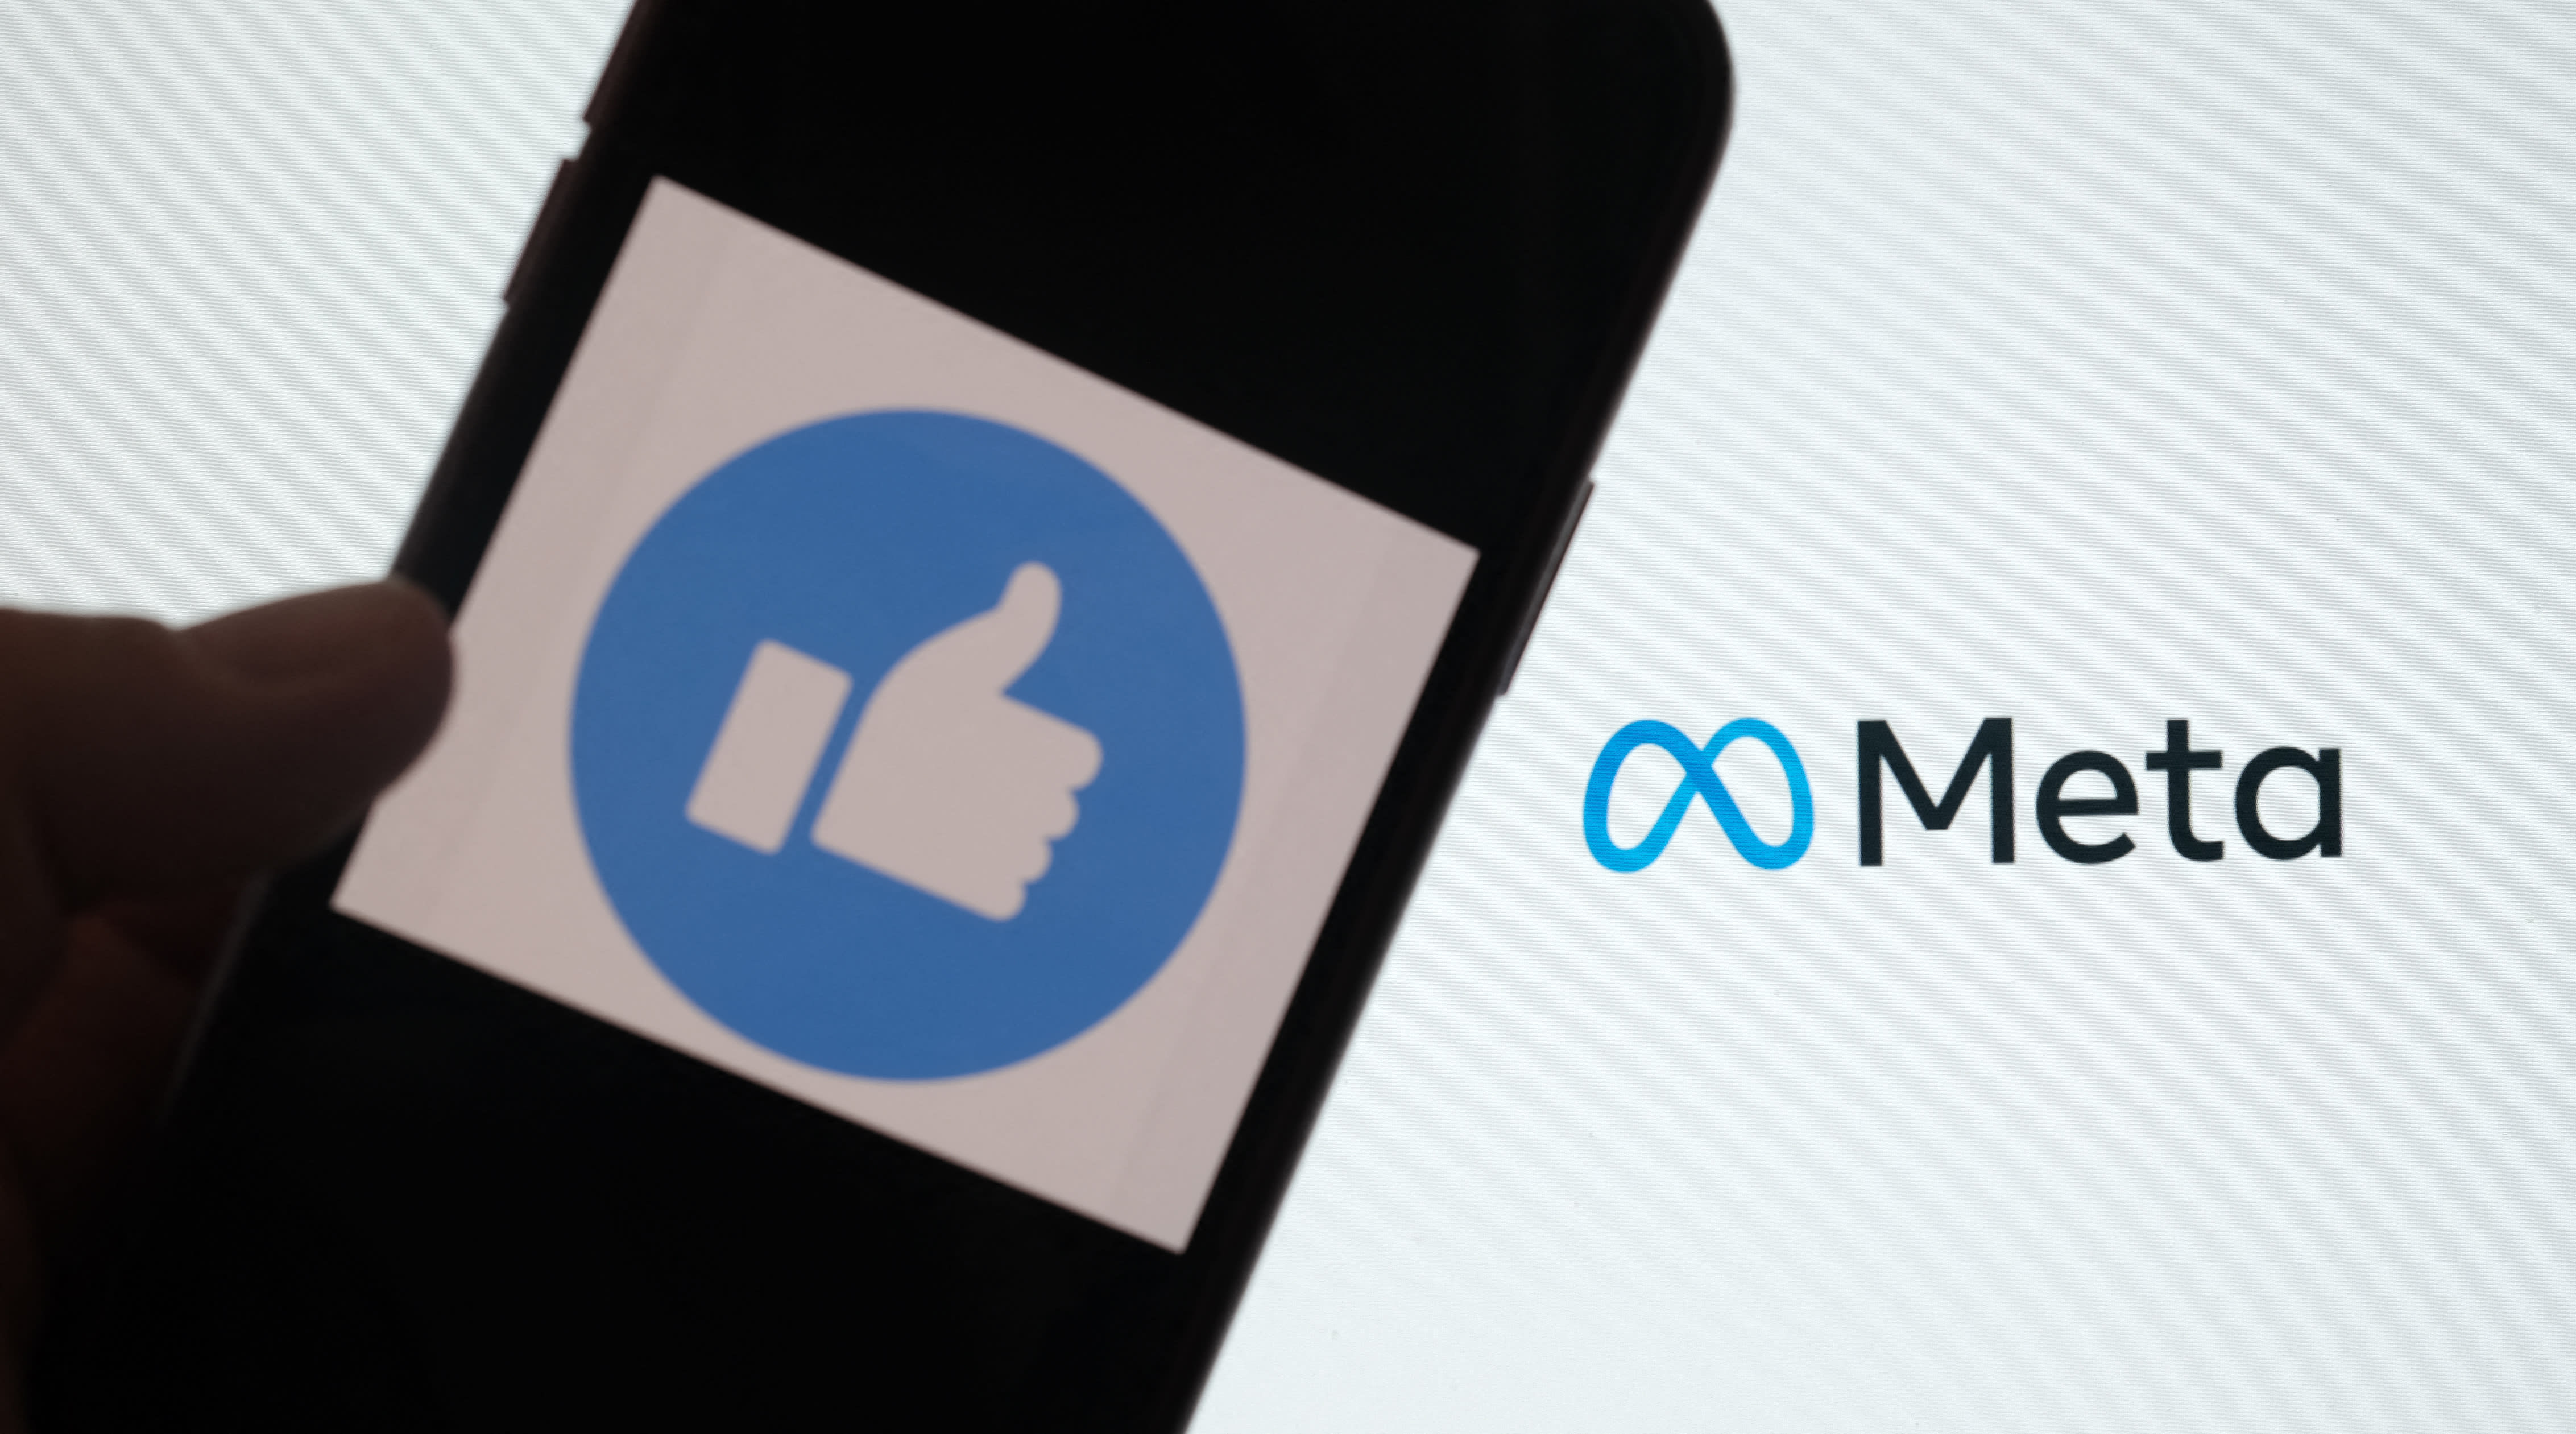 Meta has lost about half of its value since the start of the year, after a dismal February earnings report when Facebook's daily active users declined for the first time and it forecast a gloomy quarter.